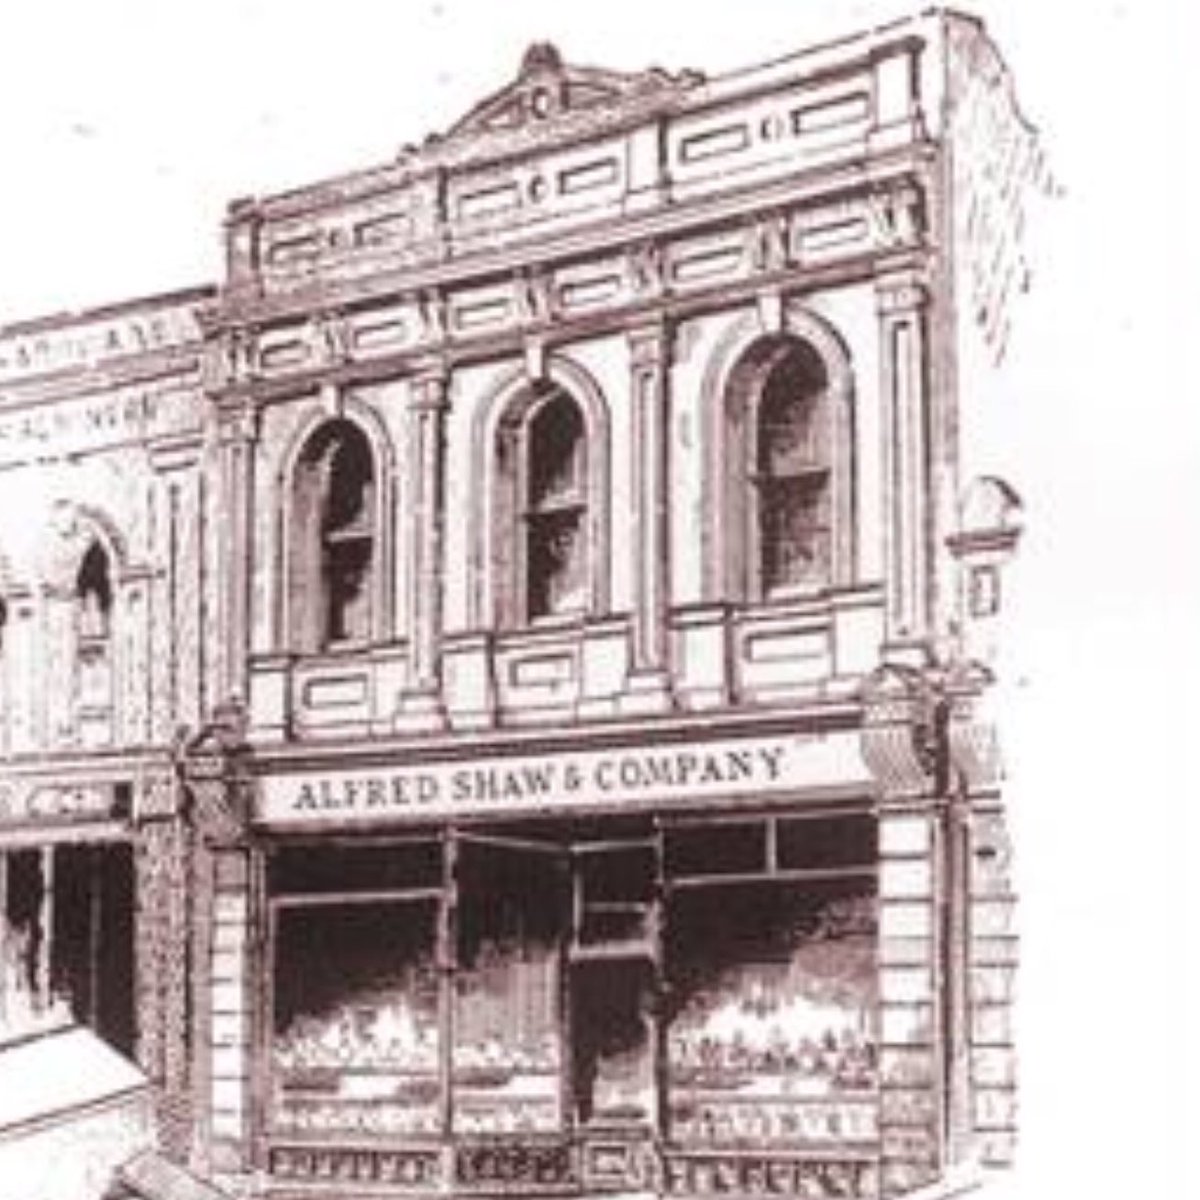 As it is today, Queen Street in 1892 was the main shopping destination for Brisbane locals. And Alfred Shaw and Co was the largest and most popular hardware store. (Hardware included furniture and crockery, as well as the usual Bunnings stuff.) THIS IS WHERE THE BUMSEX HAPPENED!